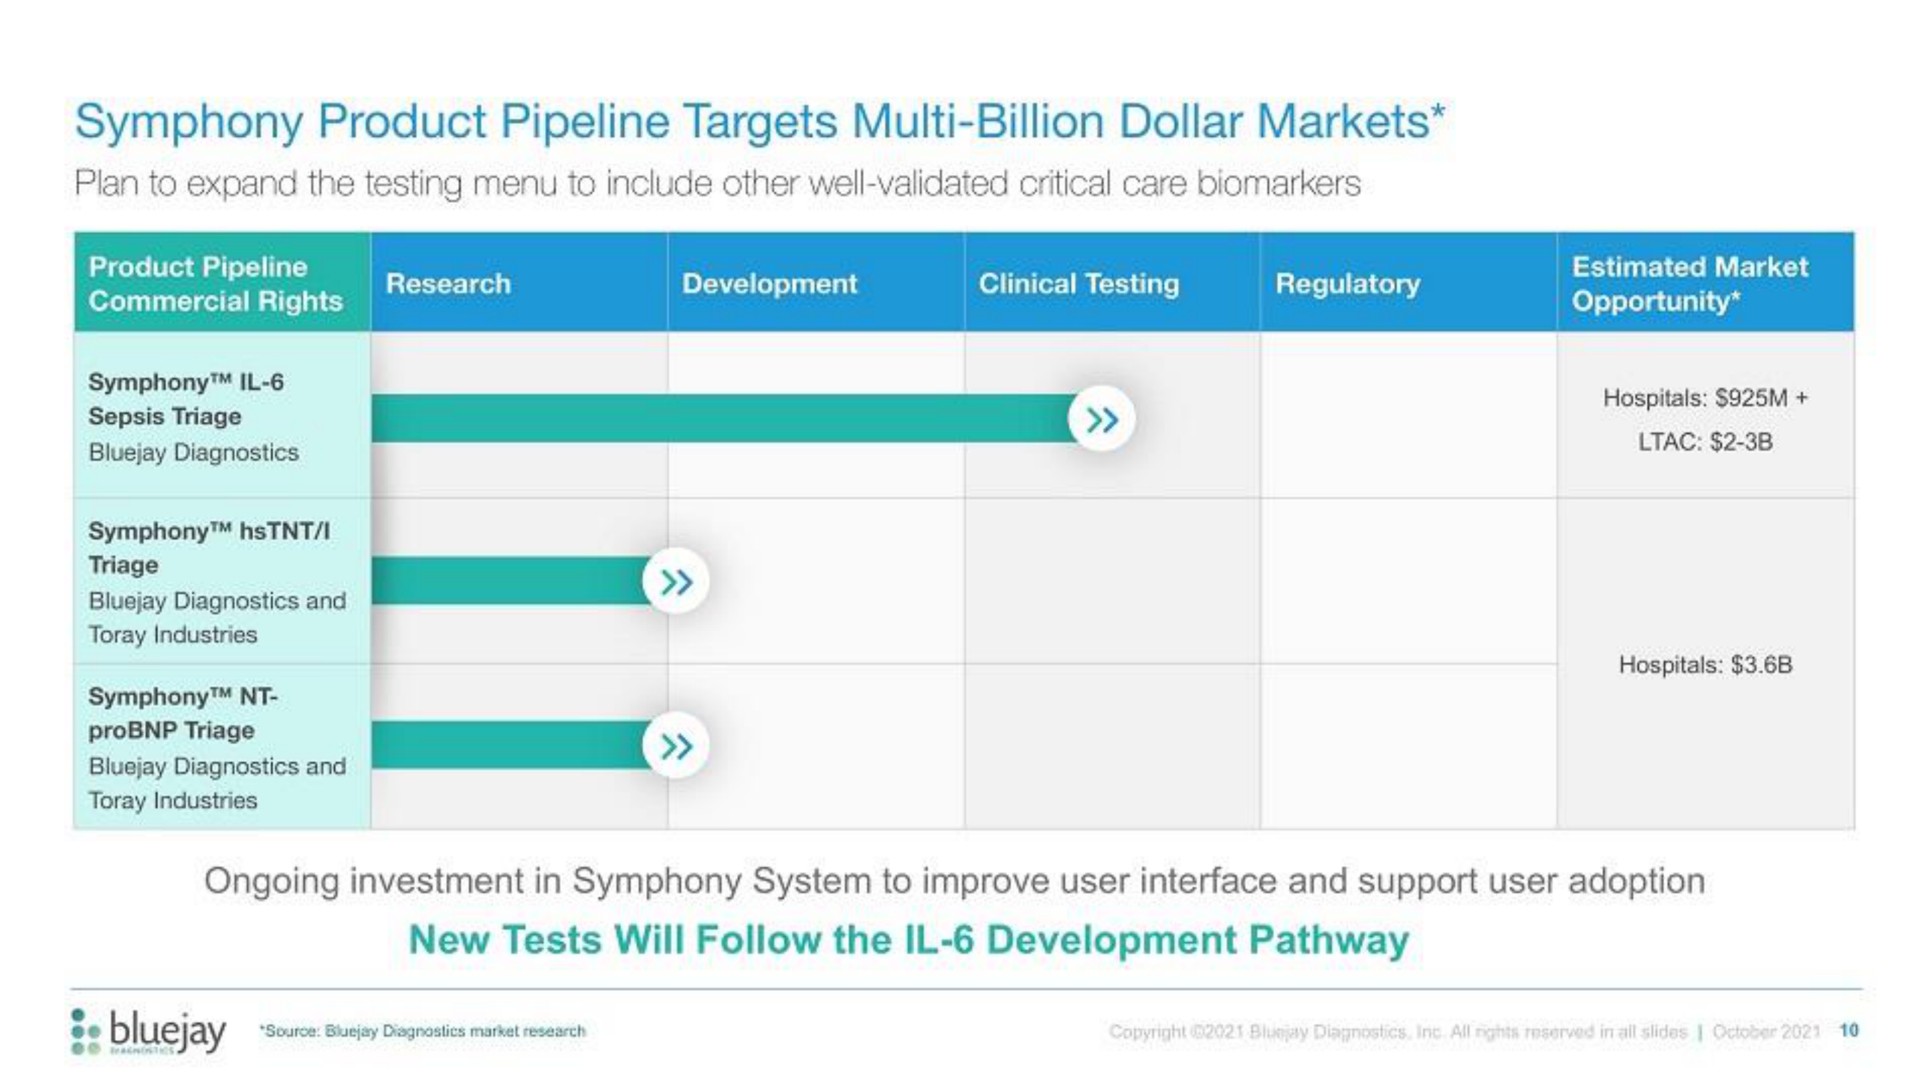 symphony product pipeline targets billion dollar markets sepsis triage new tests will follow the development pathway | Bluejay